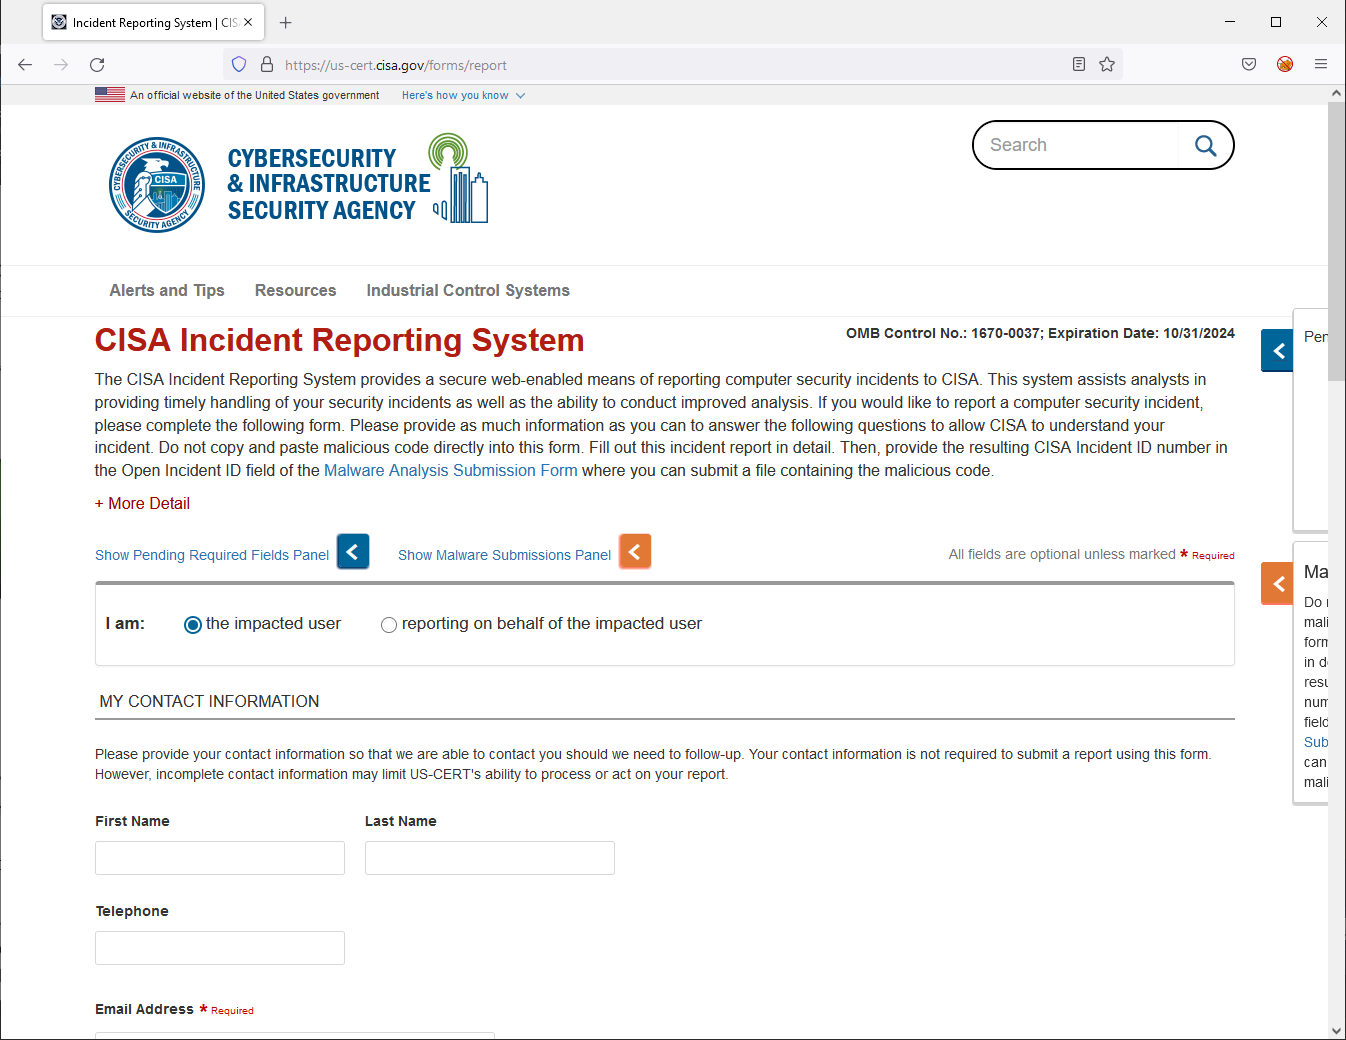 CISA Incident Reporting System